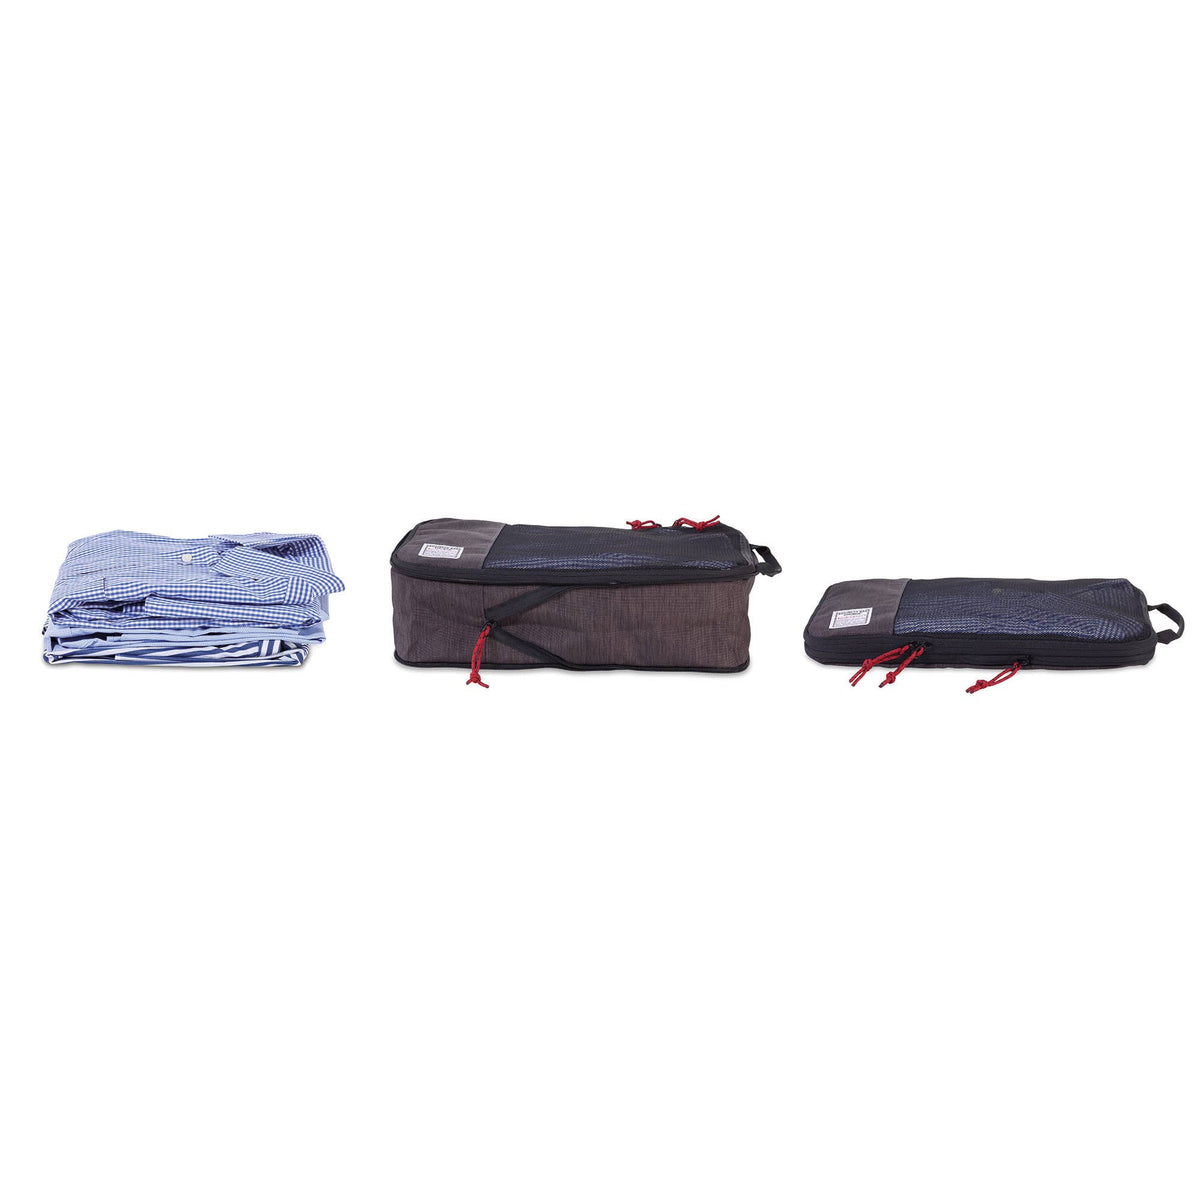 Troika Business Set of 3 Compression Packing Cubes